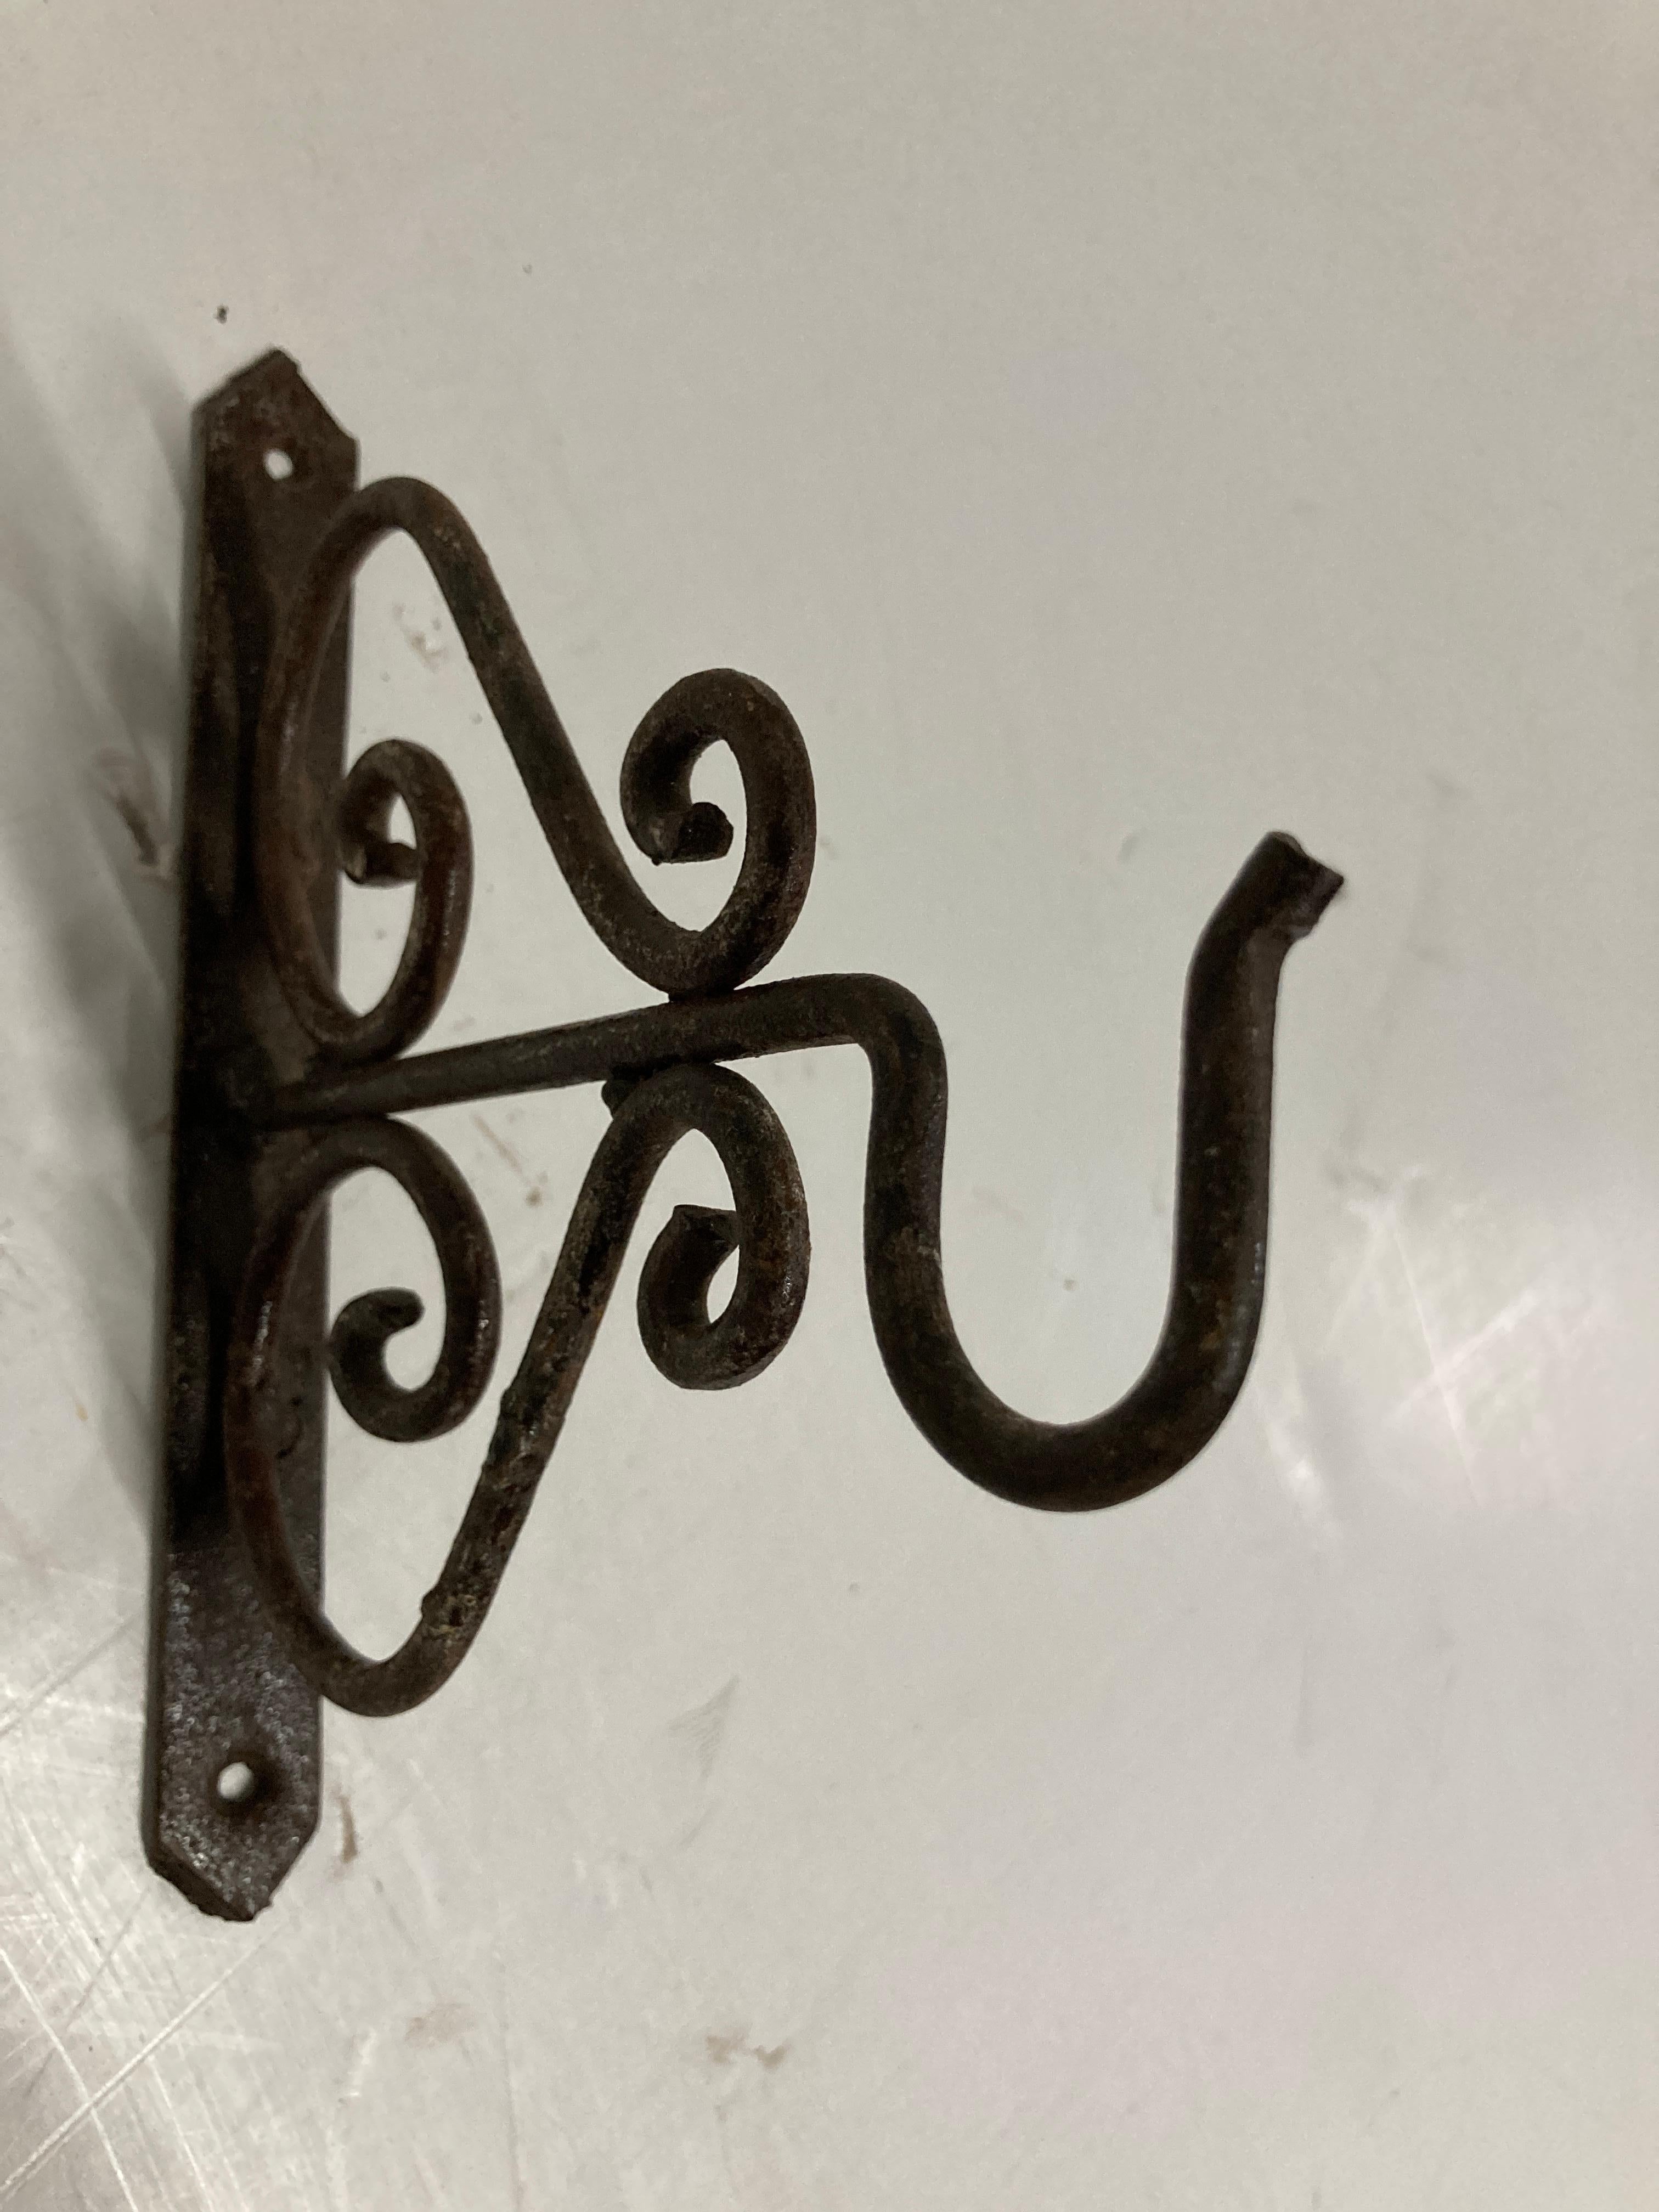 Hand crafted iron scroll design wall bracket. 
Wrought iron handcrafted wall-bracket for lanterns or signs.
Perfect for hanging lights or plants outdoors.
Scrolling wall-mounted brackets.
Multiple available.
Dimensions: Projection: 6